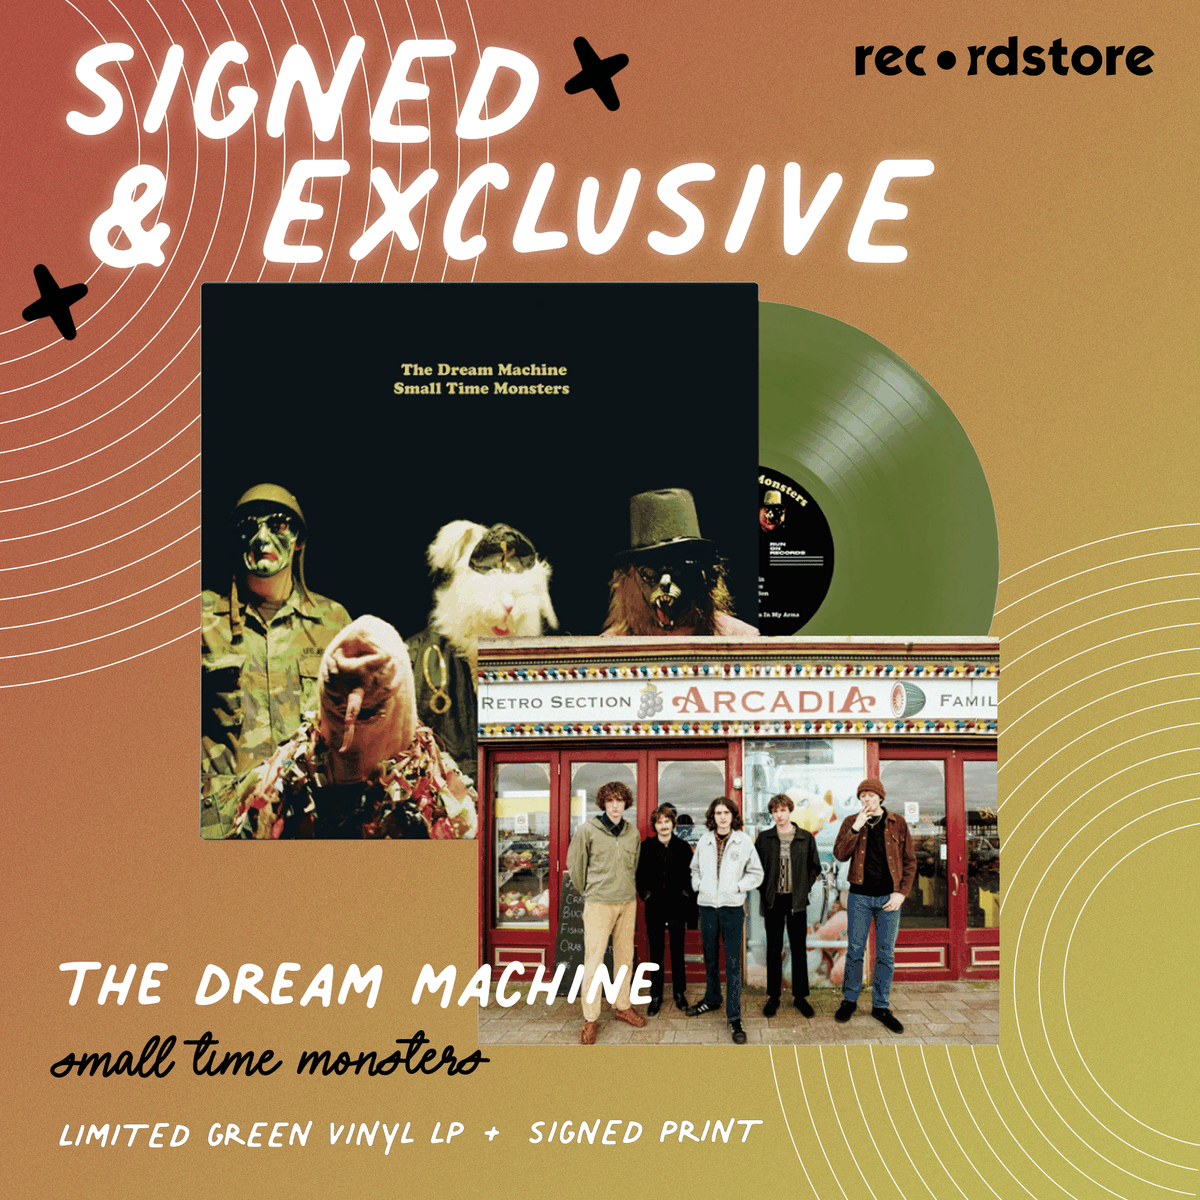 SIGNED | The Dream Machine - Small Time Monsters: Limited Green Vinyl LP + Signed Print Merseyside indie rock quartet The Dream Machine return with their second full-length album, Small Time Monsters. Shop now >> lnk.to/Mxo8CTTP @DreamMachineHQ | @RunOnRecords